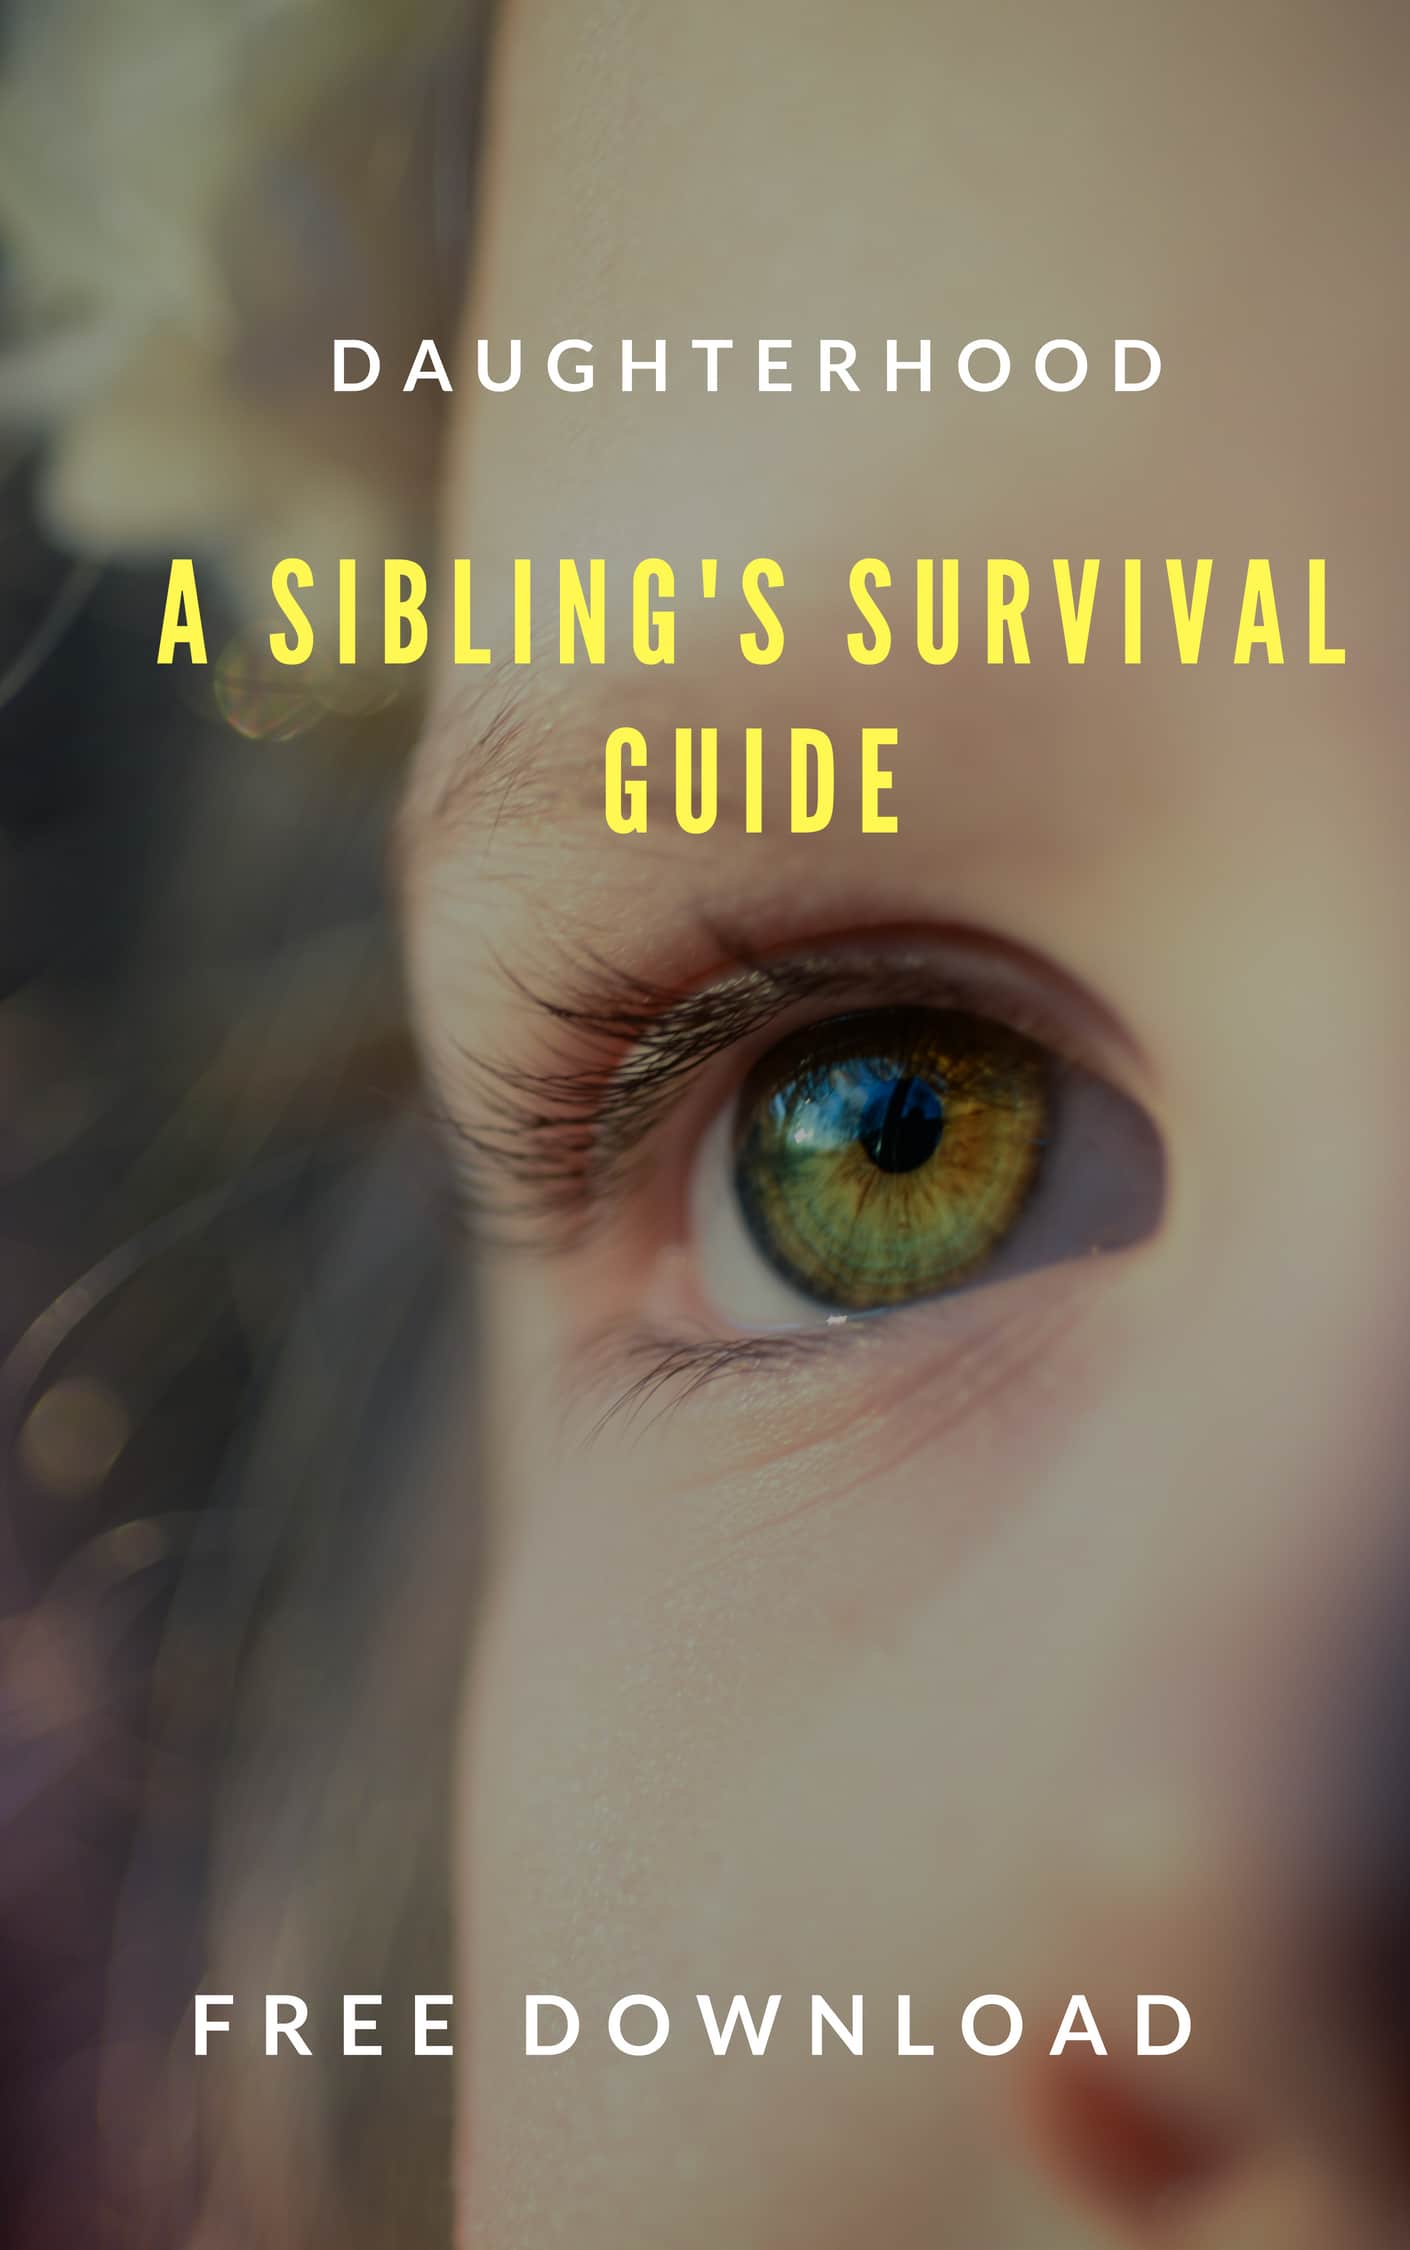 A Sibling’s Survival Guide